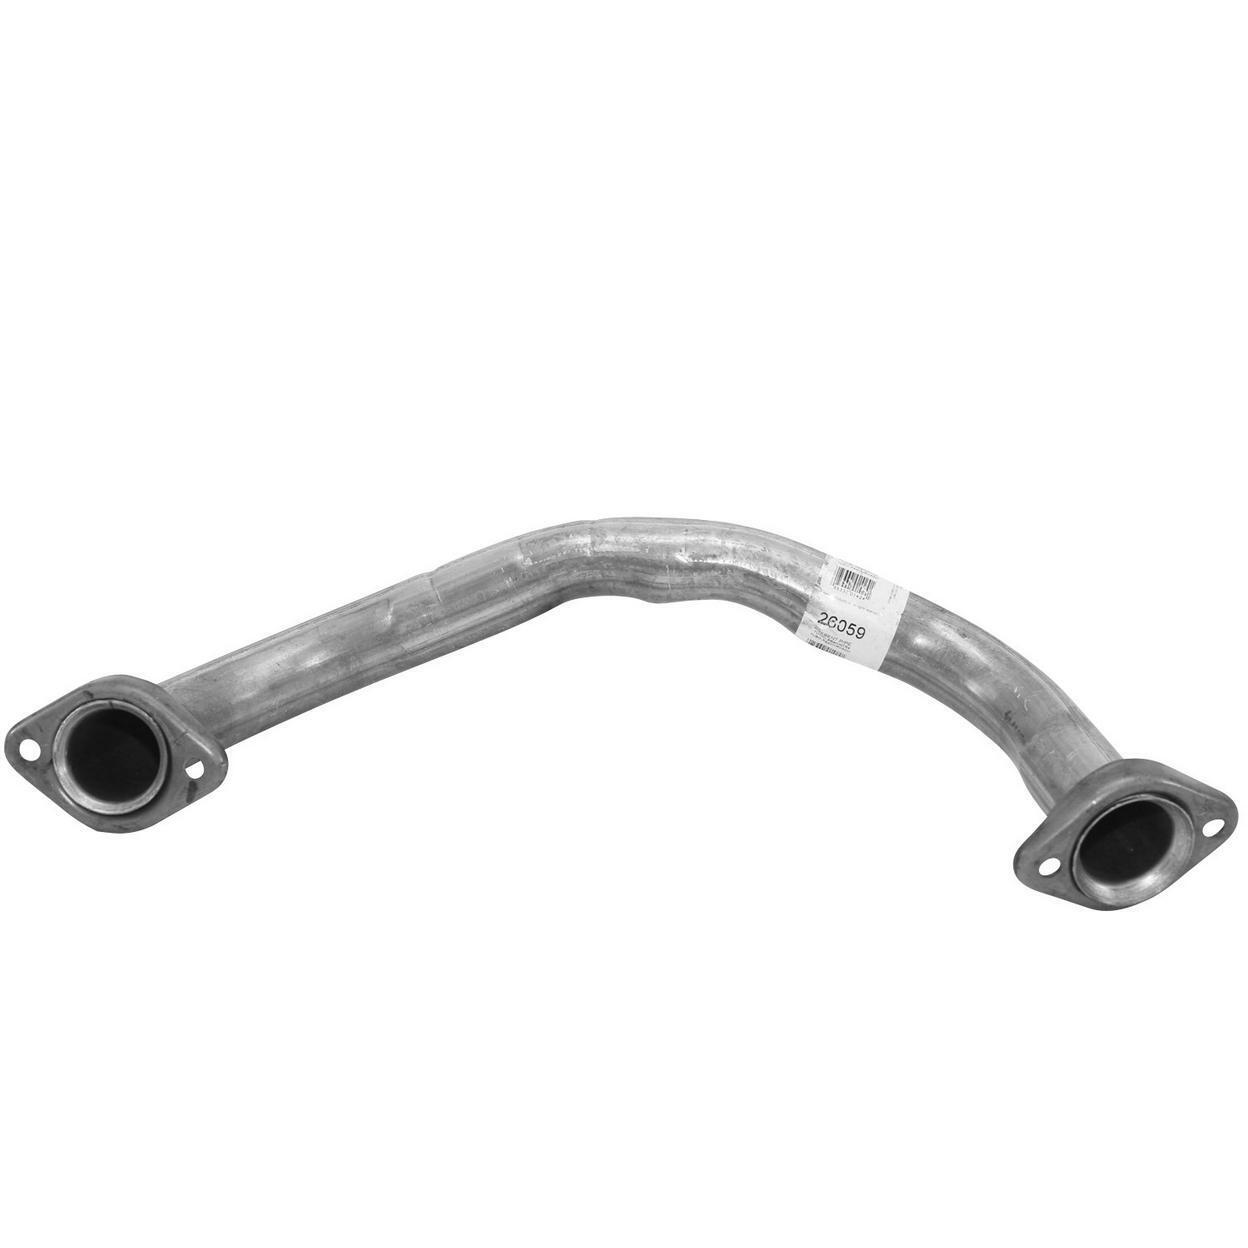 26059-IE Exhaust Pipe Fits 1988 Oldsmobile Cutlass Supreme Classic Brougham 5.0L